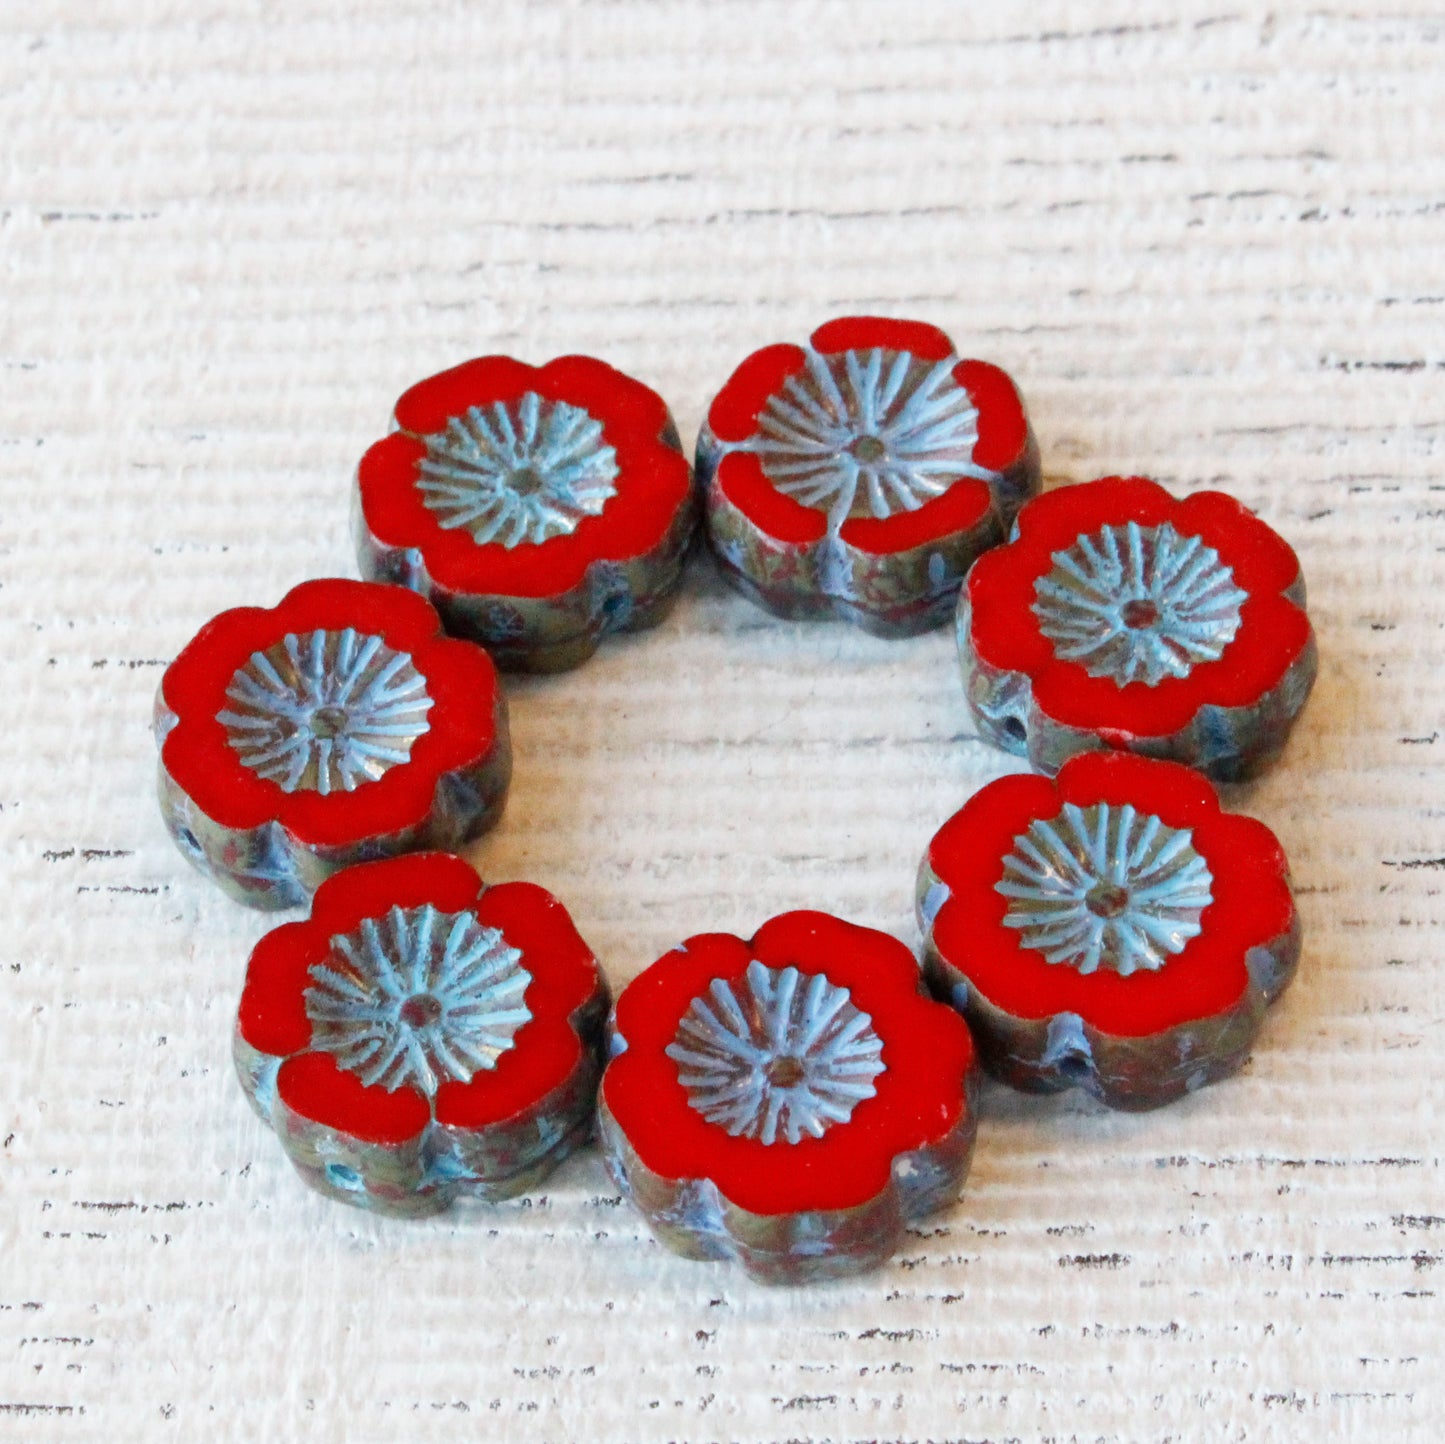 14mm Hibiscus Flower Bead - Red with Blue Wash - 10 Beads